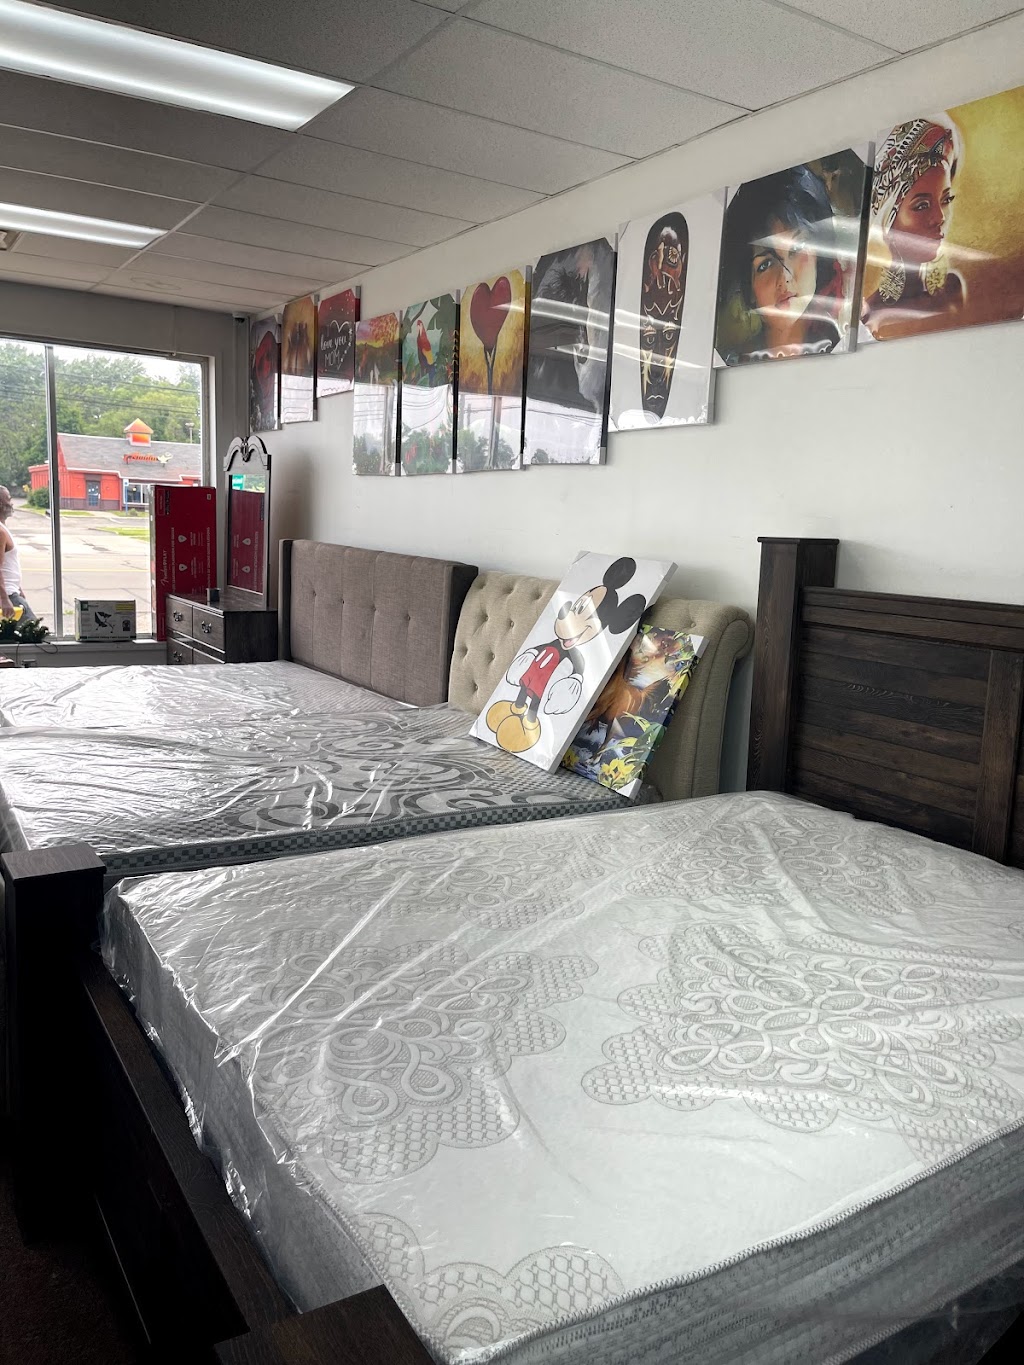 Sams Outlet & mattress & appliances & Furniture | 26449 Plymouth Rd, Redford Charter Twp, MI 48239, USA | Phone: (313) 543-3500